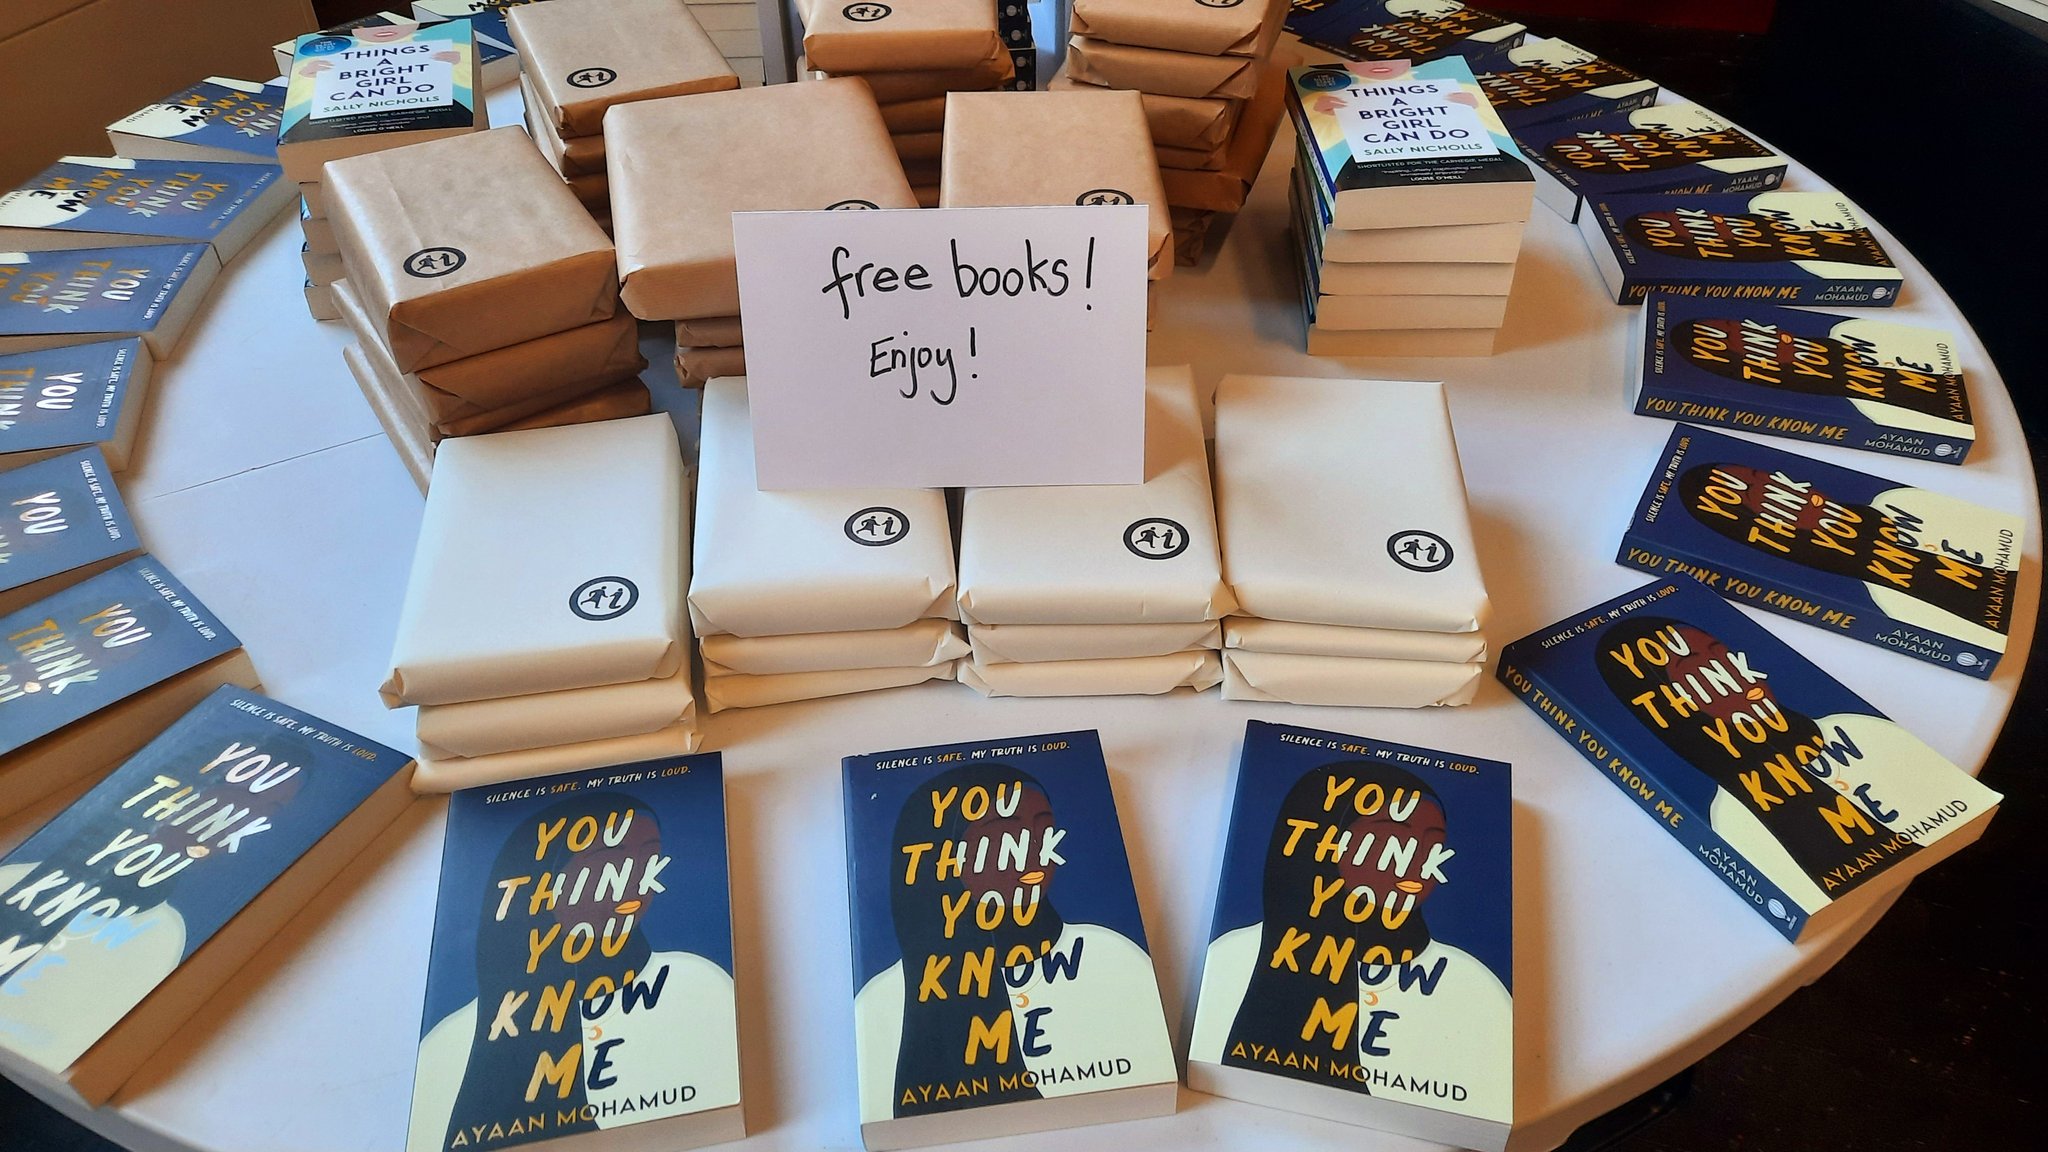 A photograph of a table with piles of books on it, some wrapped in paper, some not, and a sign saying 'Free books! Enjoy!'